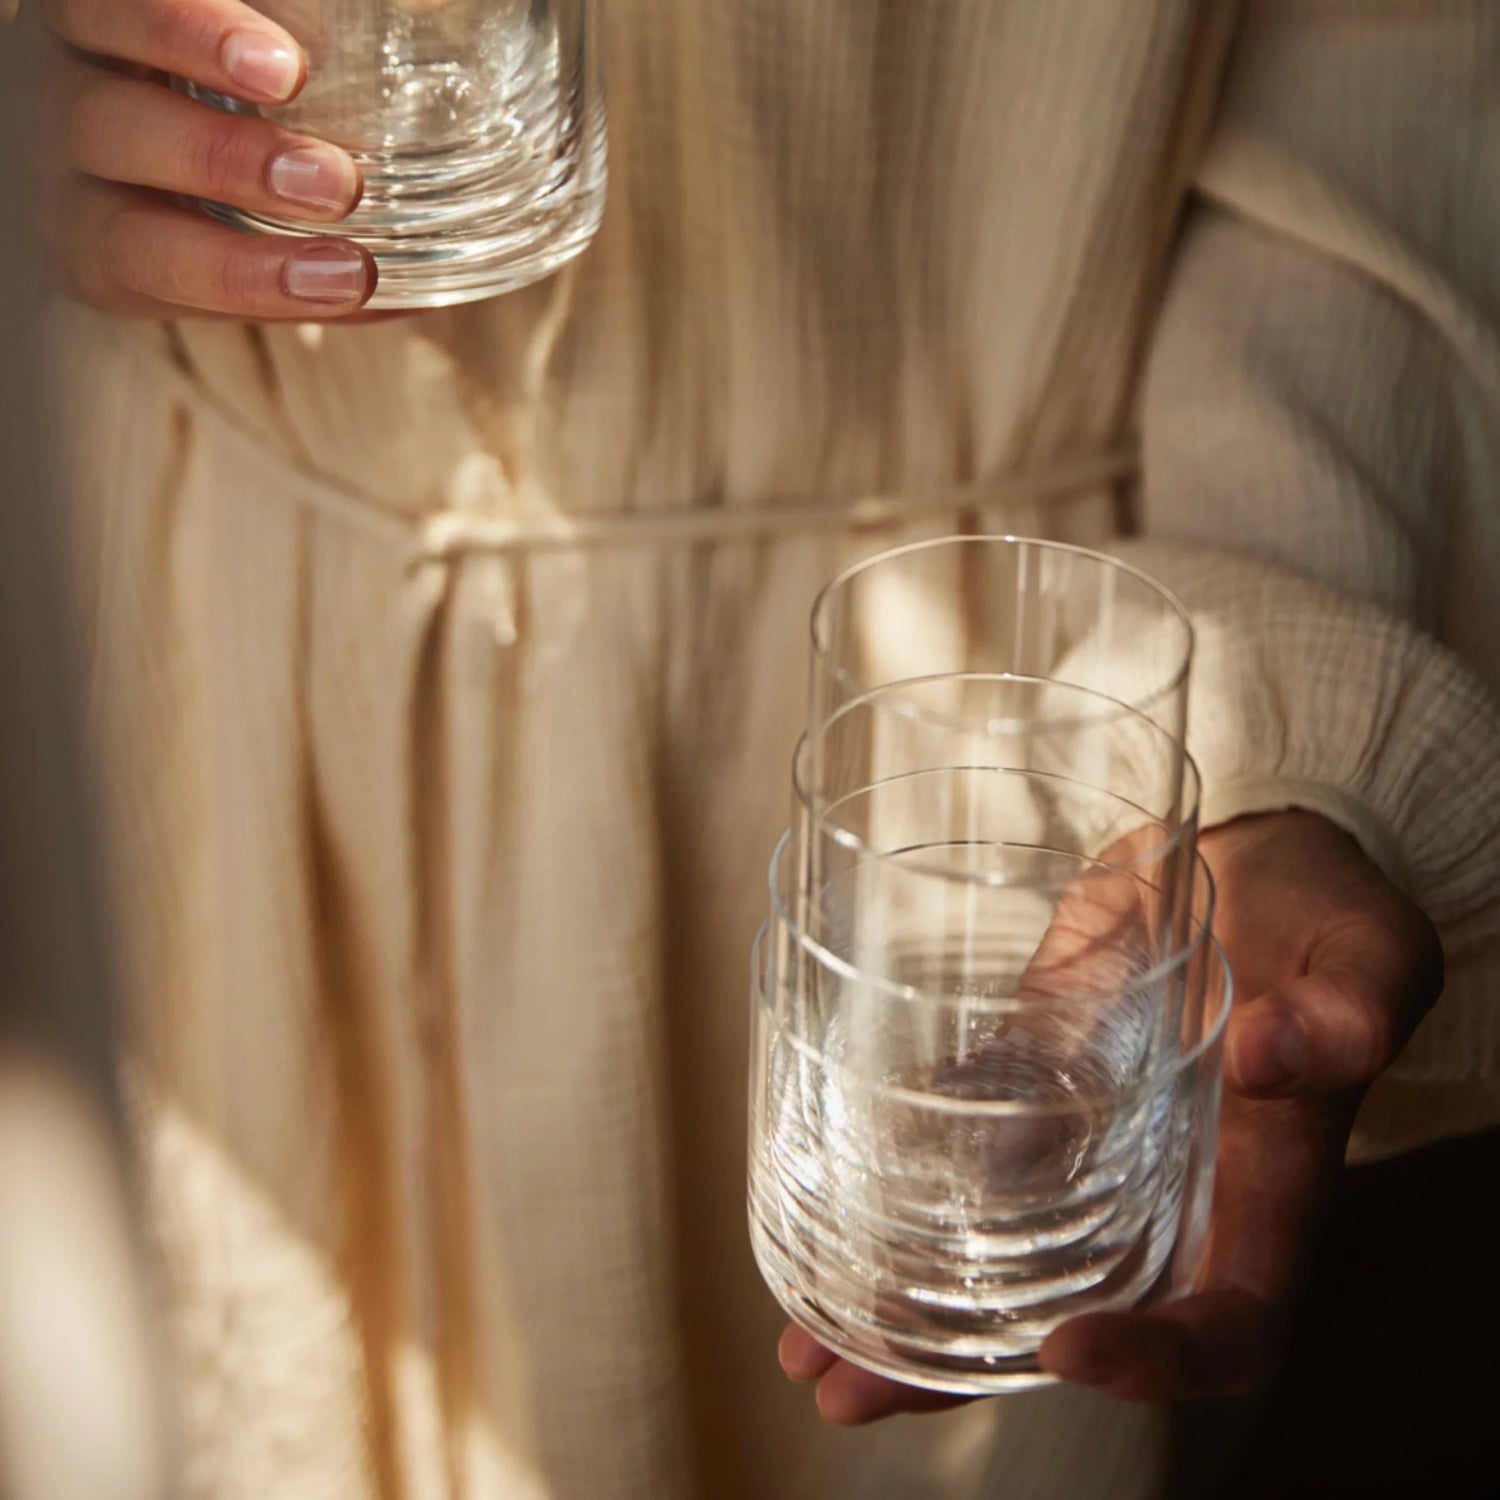 A person holding the Aarke Glassware nesting set.